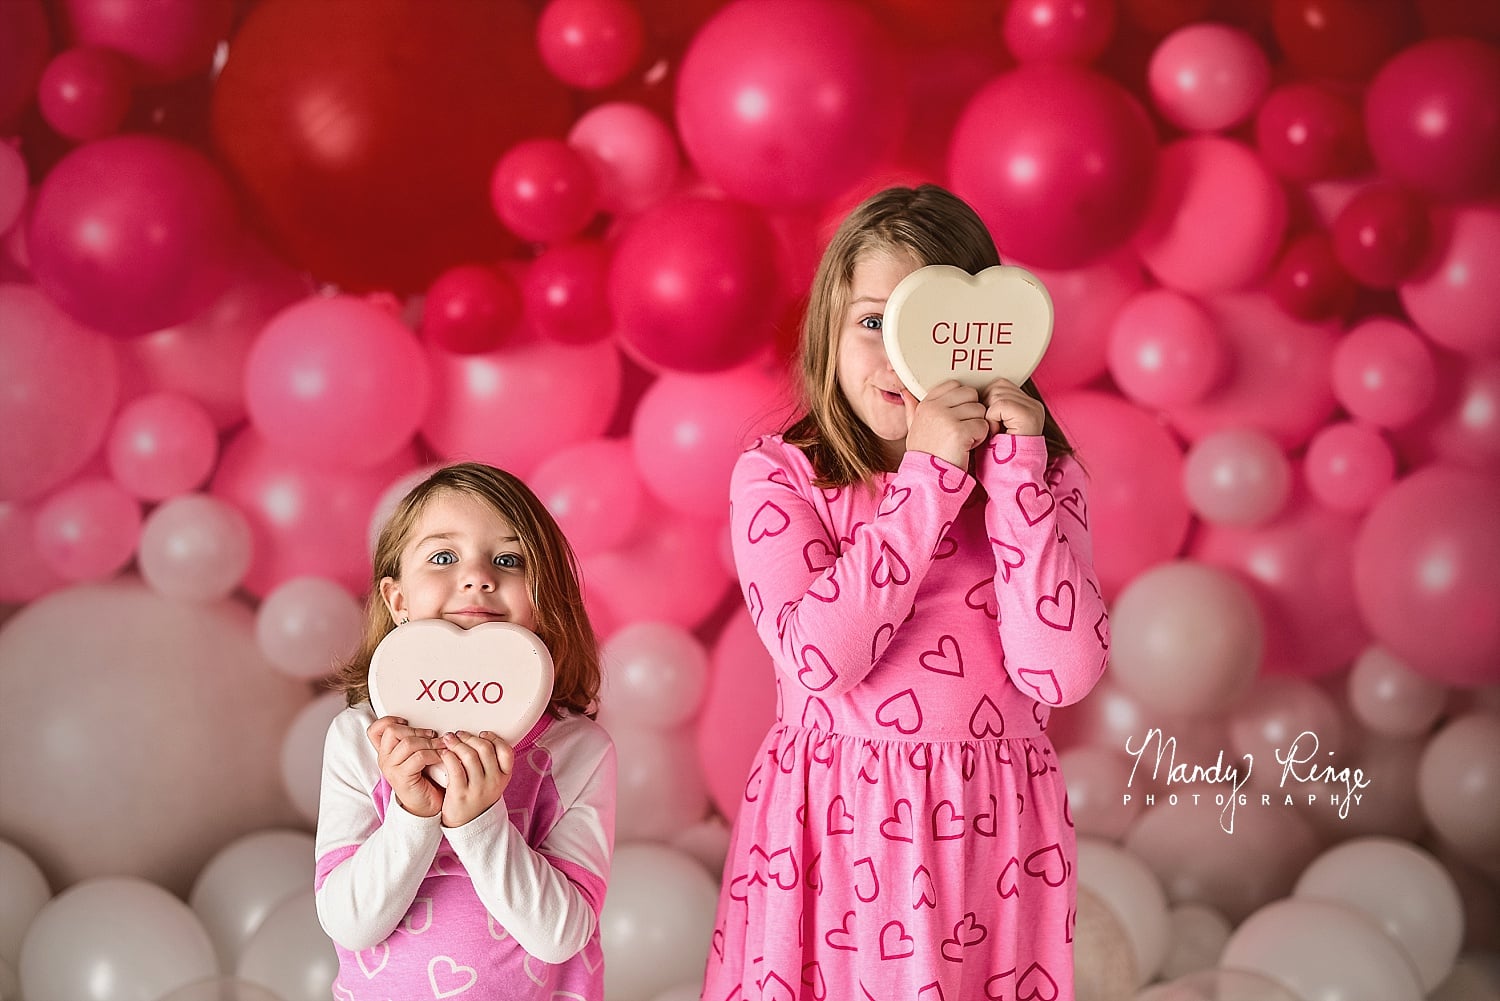 https://cdn.shopify.com/s/files/1/1619/4221/products/Kate_Valentines_Day_Balloon_Wall_Backdrop_for_Photography.jpg?v=1640741165&width=1500